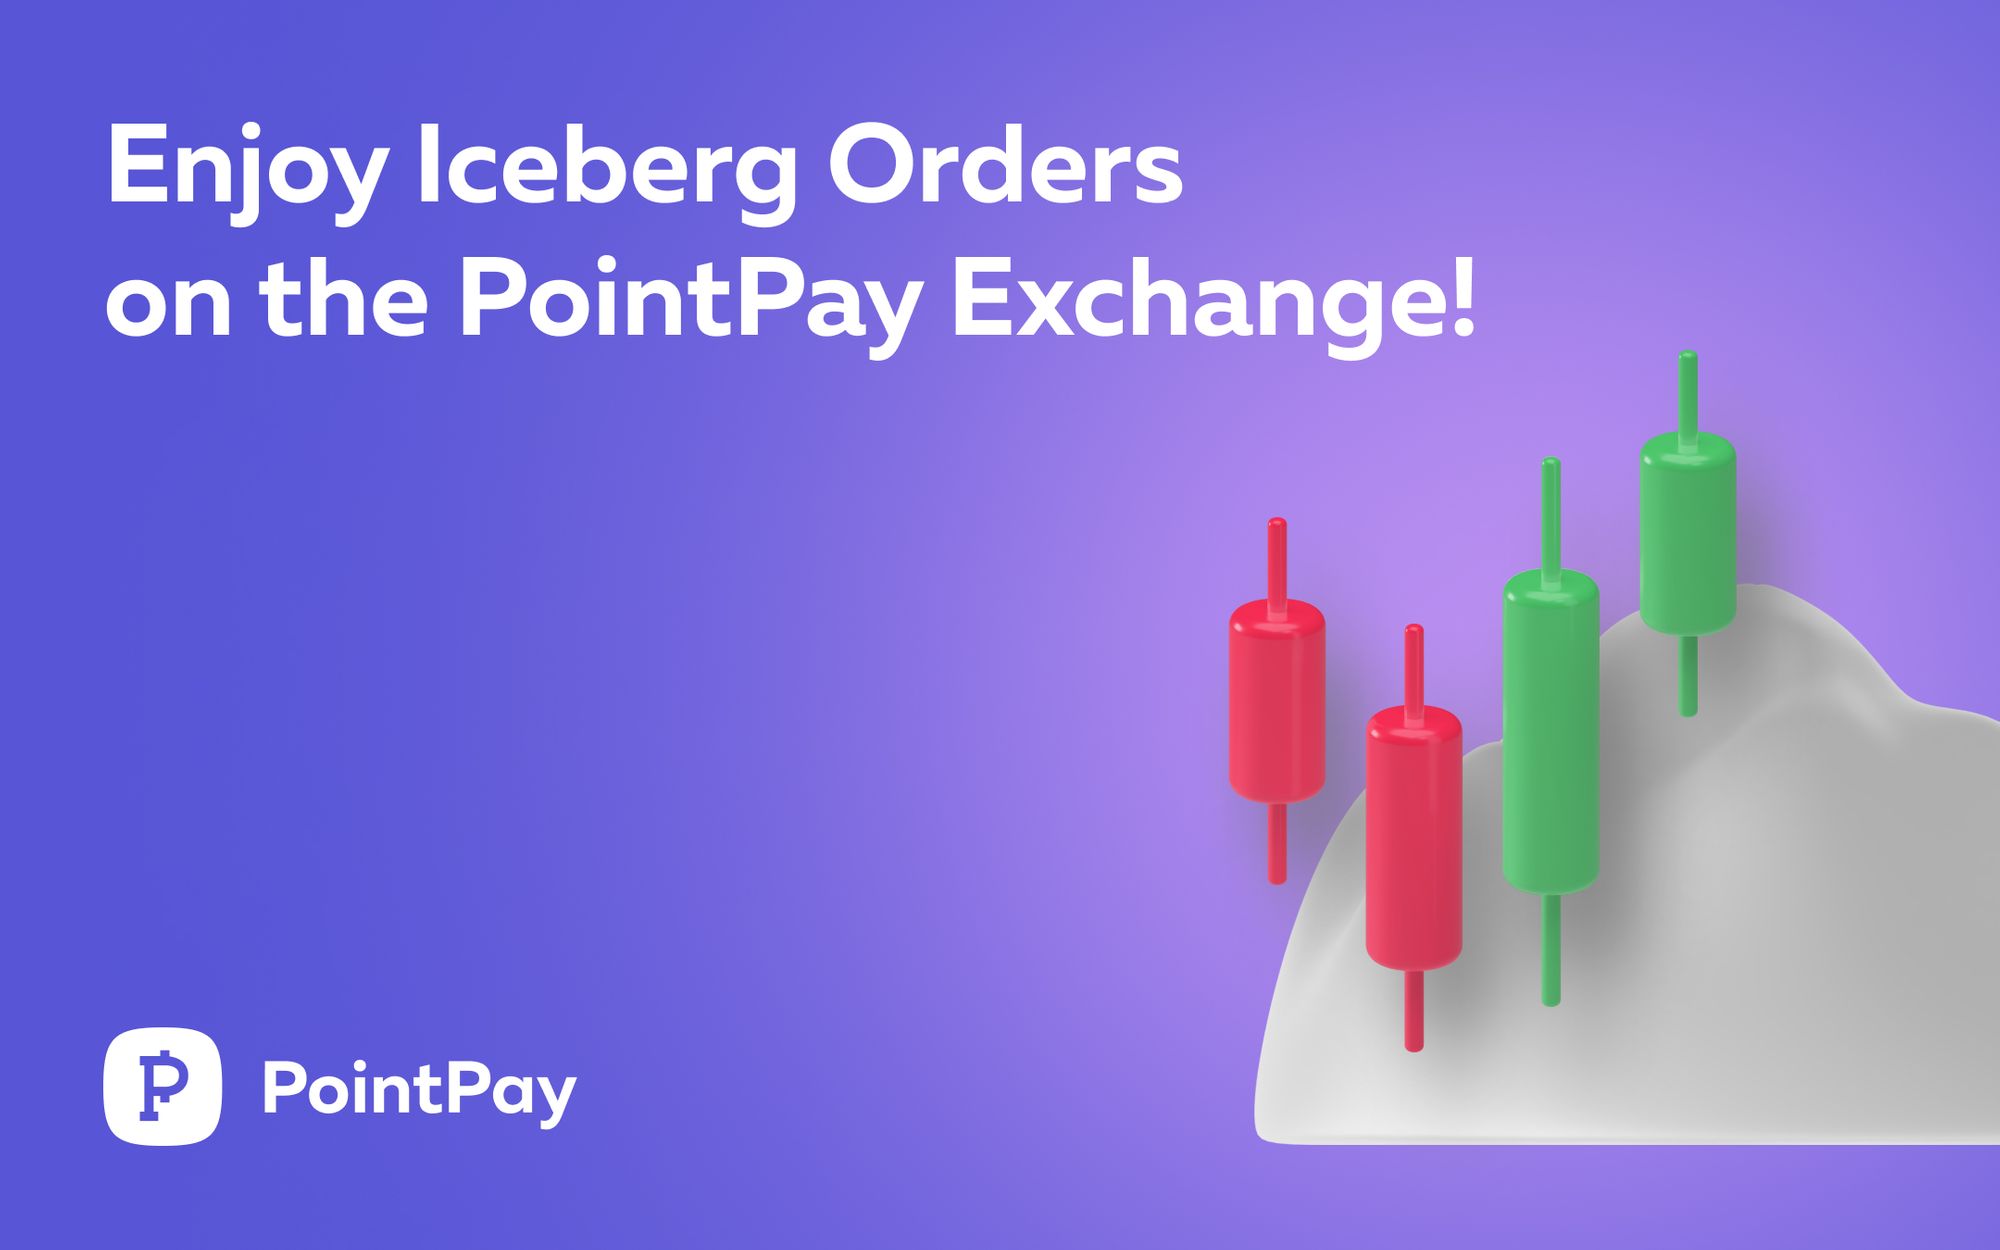 Iceberg orders are now available on the PointPay Exchange!